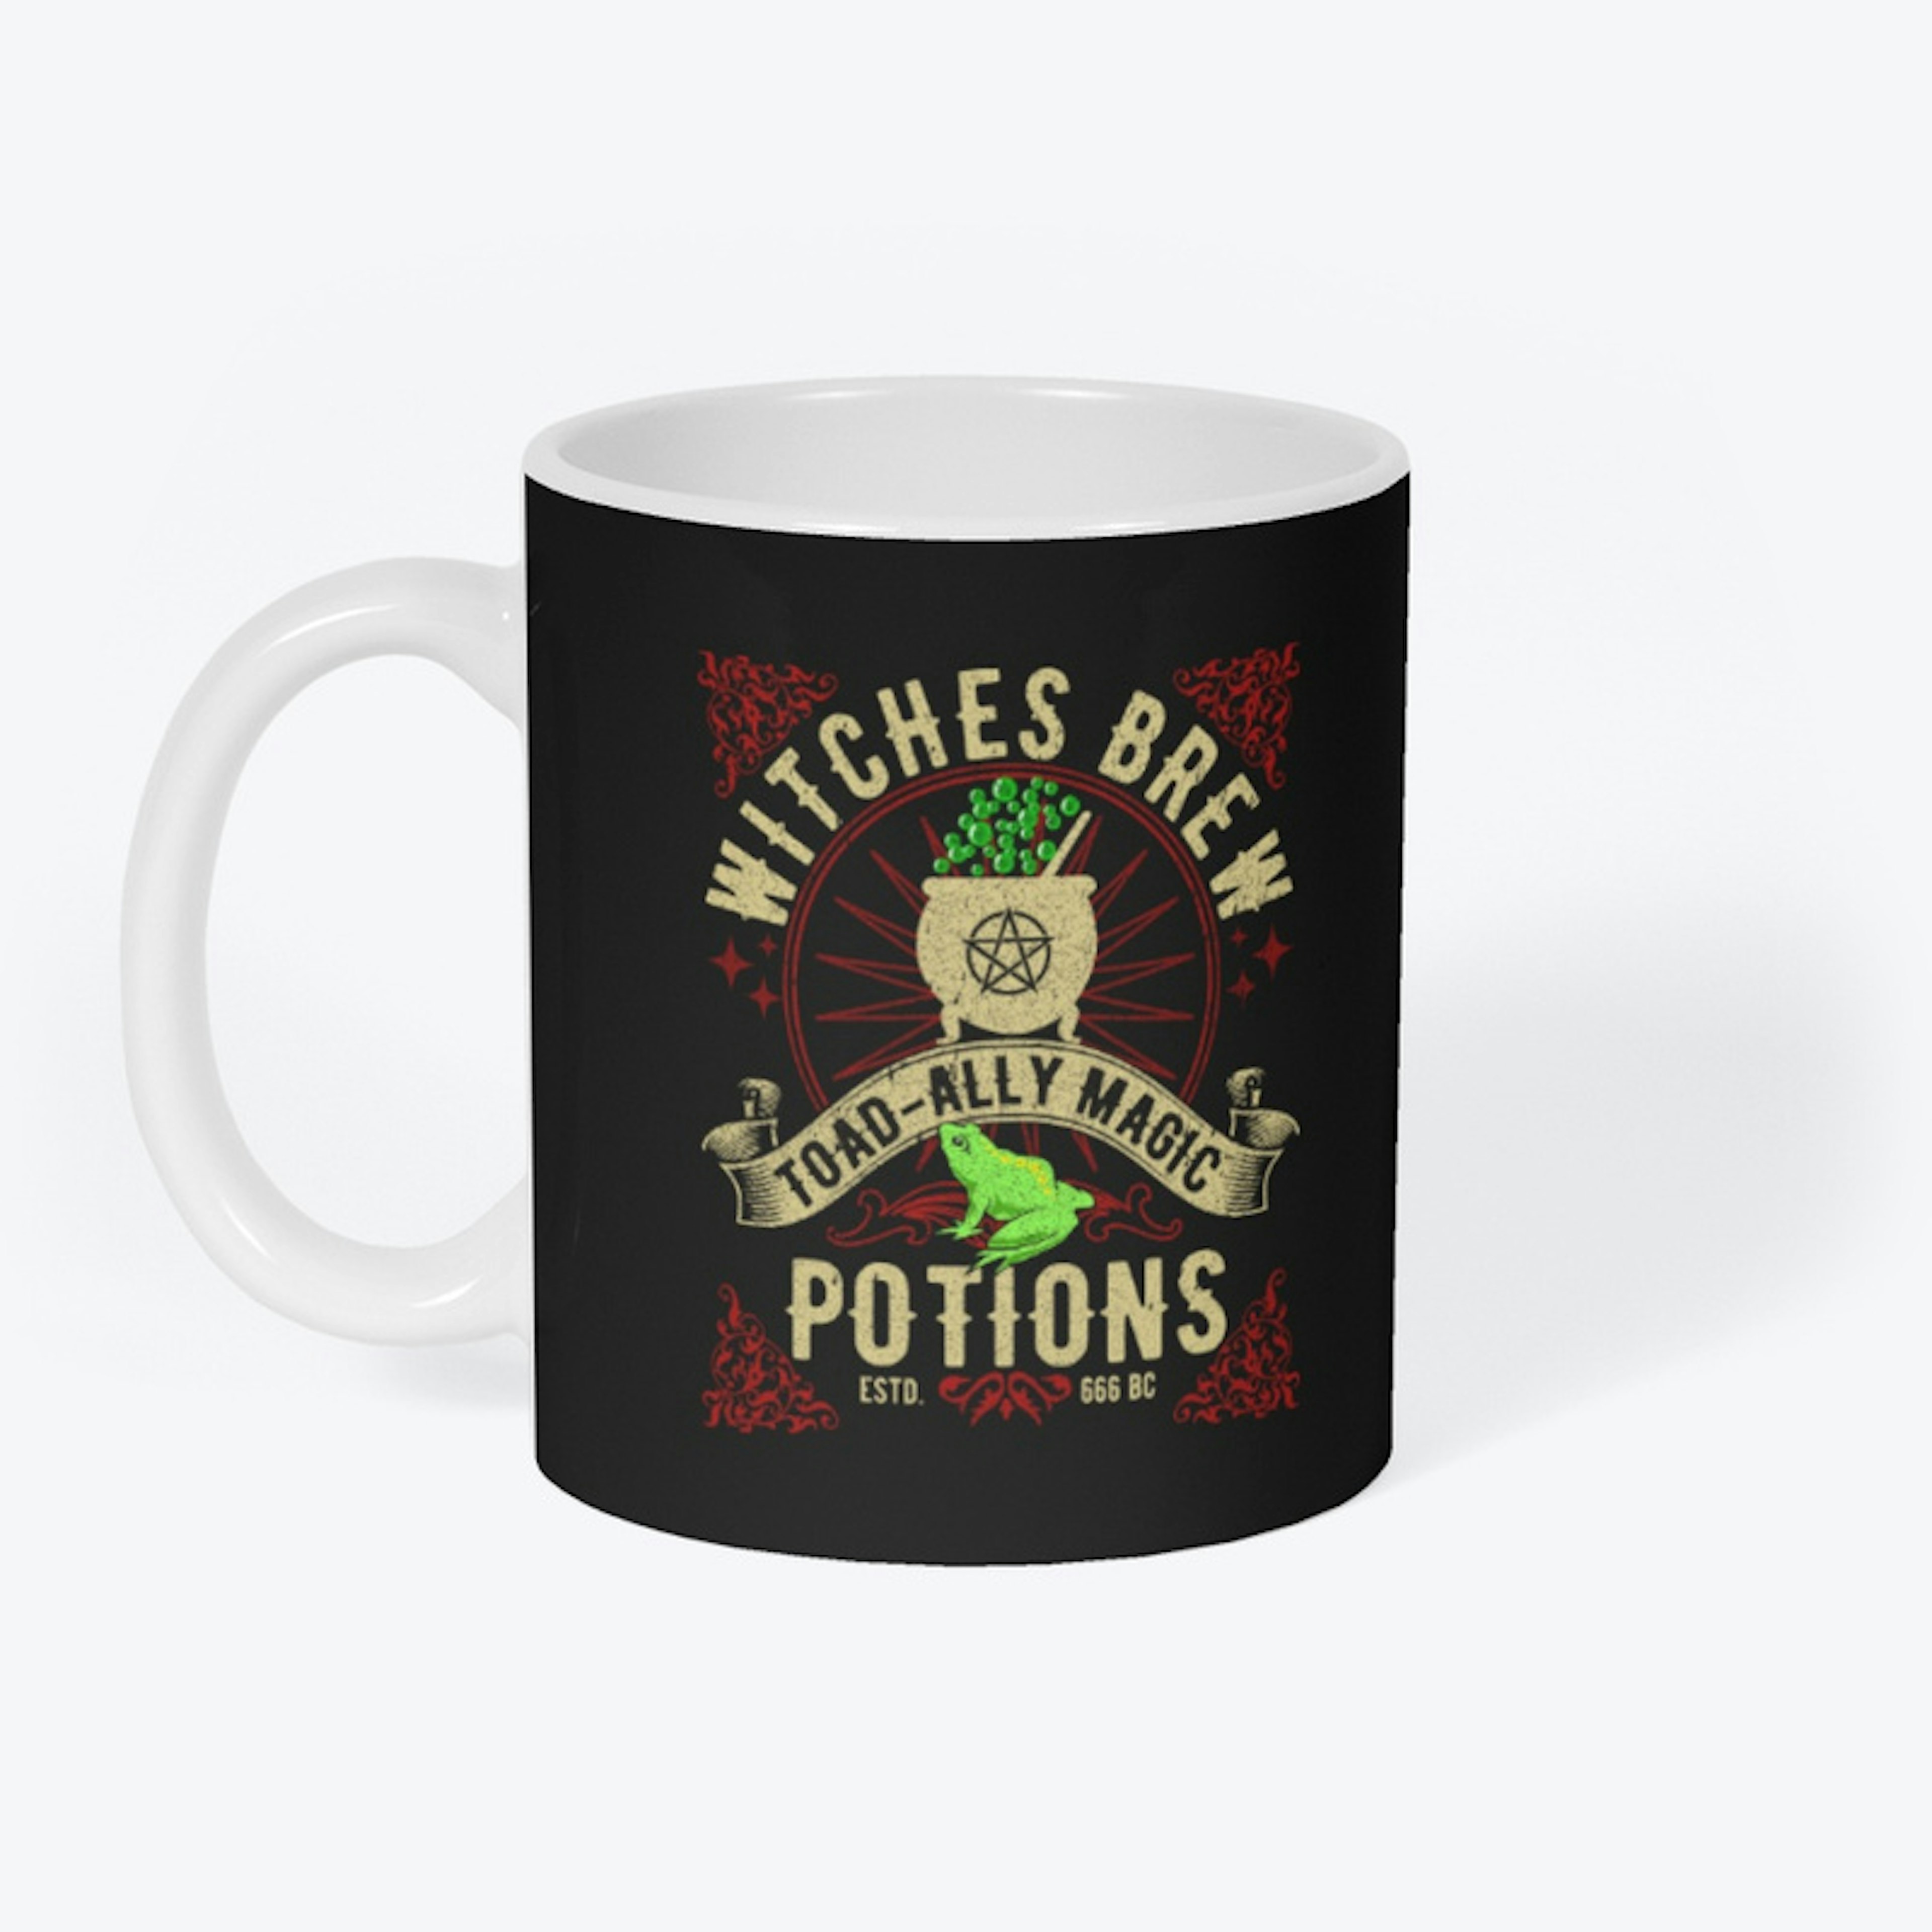 Witches Brew Toad-ally Magic Potions